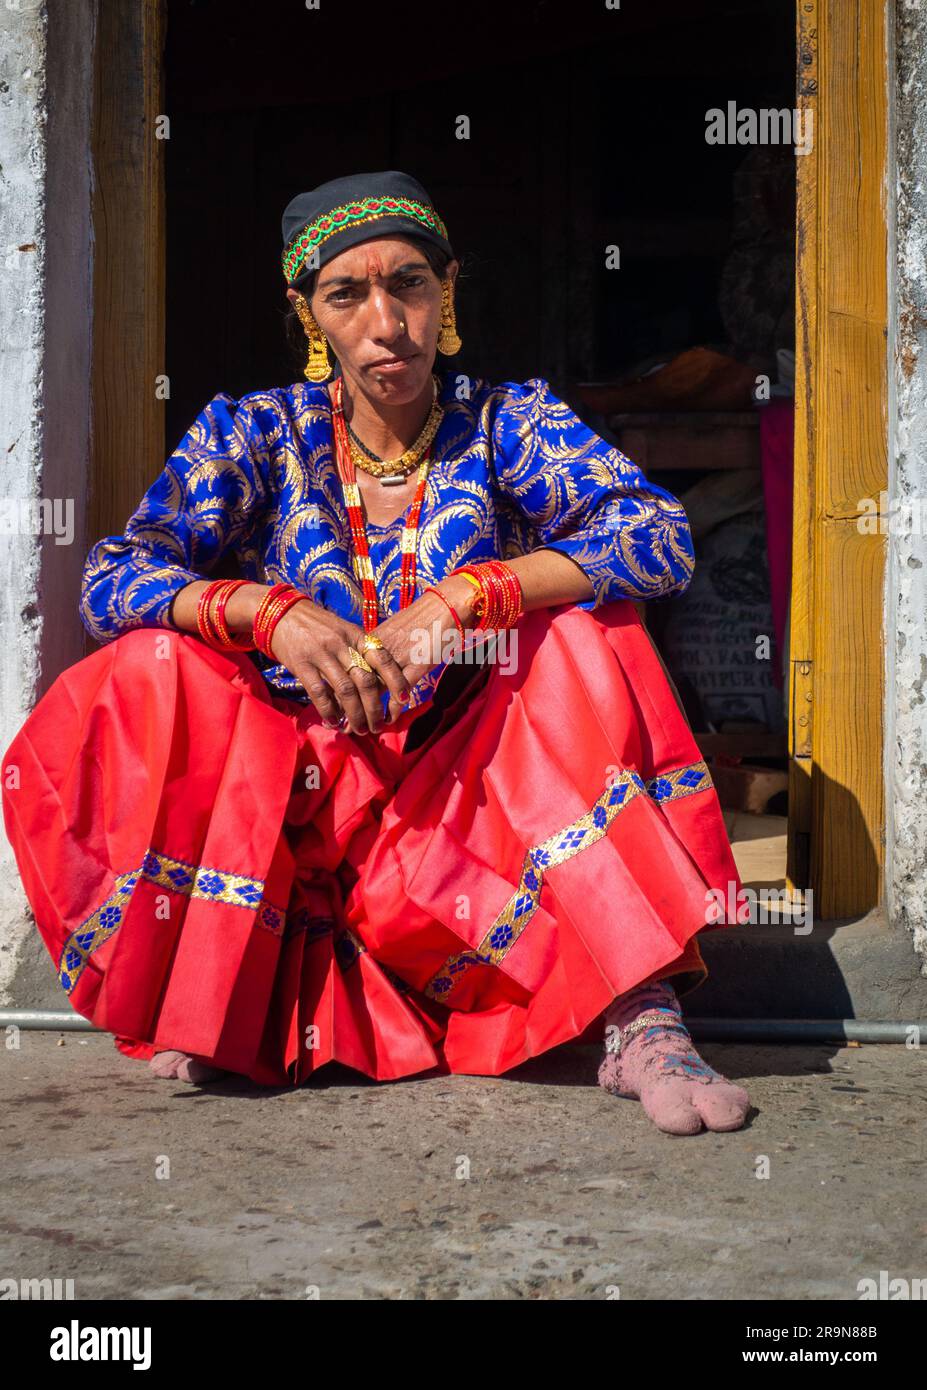 What is the traditional dress of Himachal Pradesh? - Quora